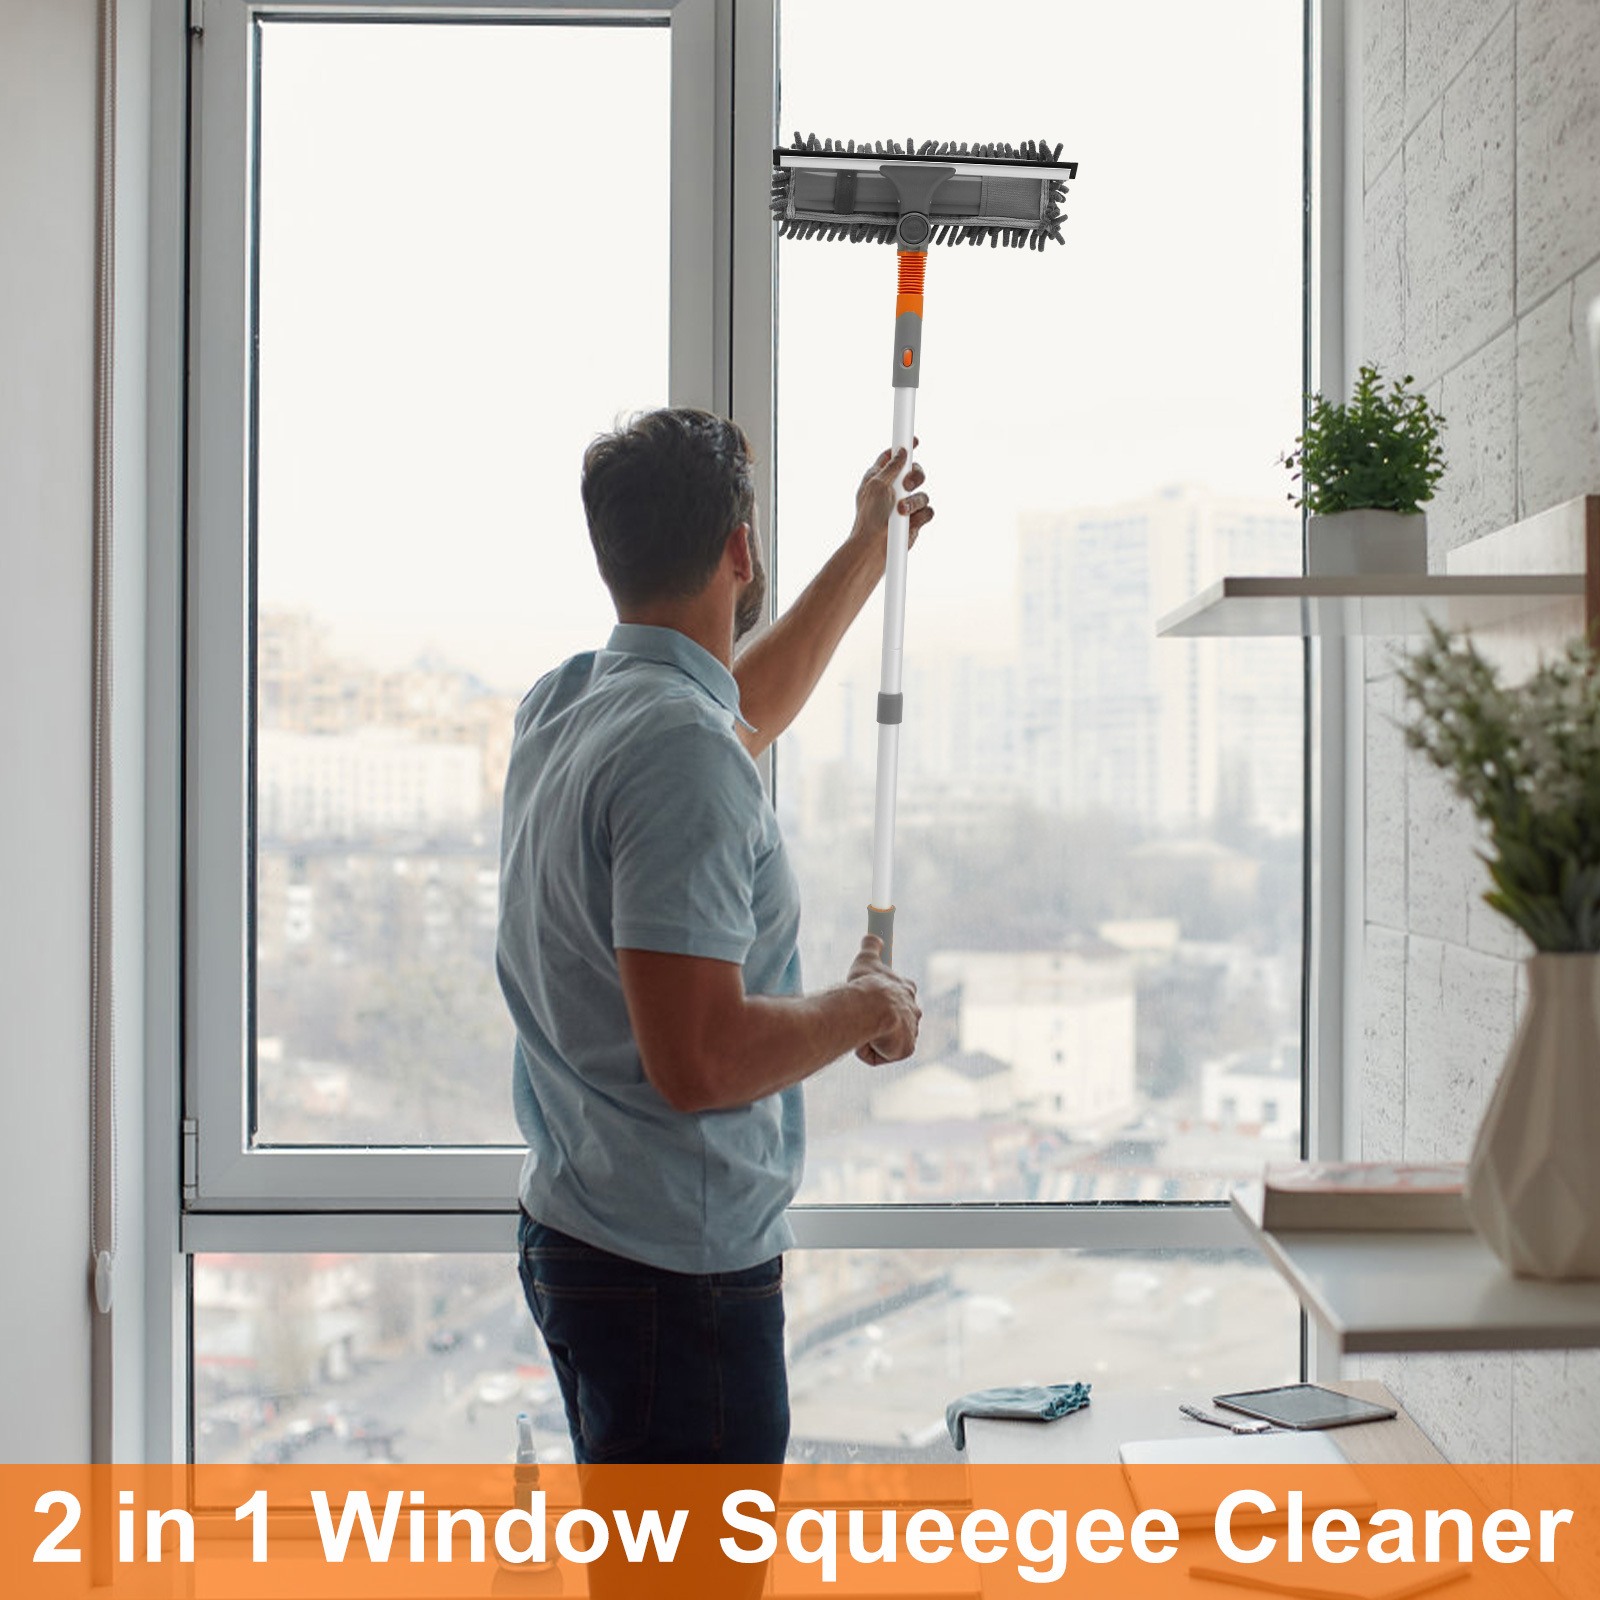 2 In 1 Window Cleaning Cloth Brush With Telescopic Rod, Squeegee